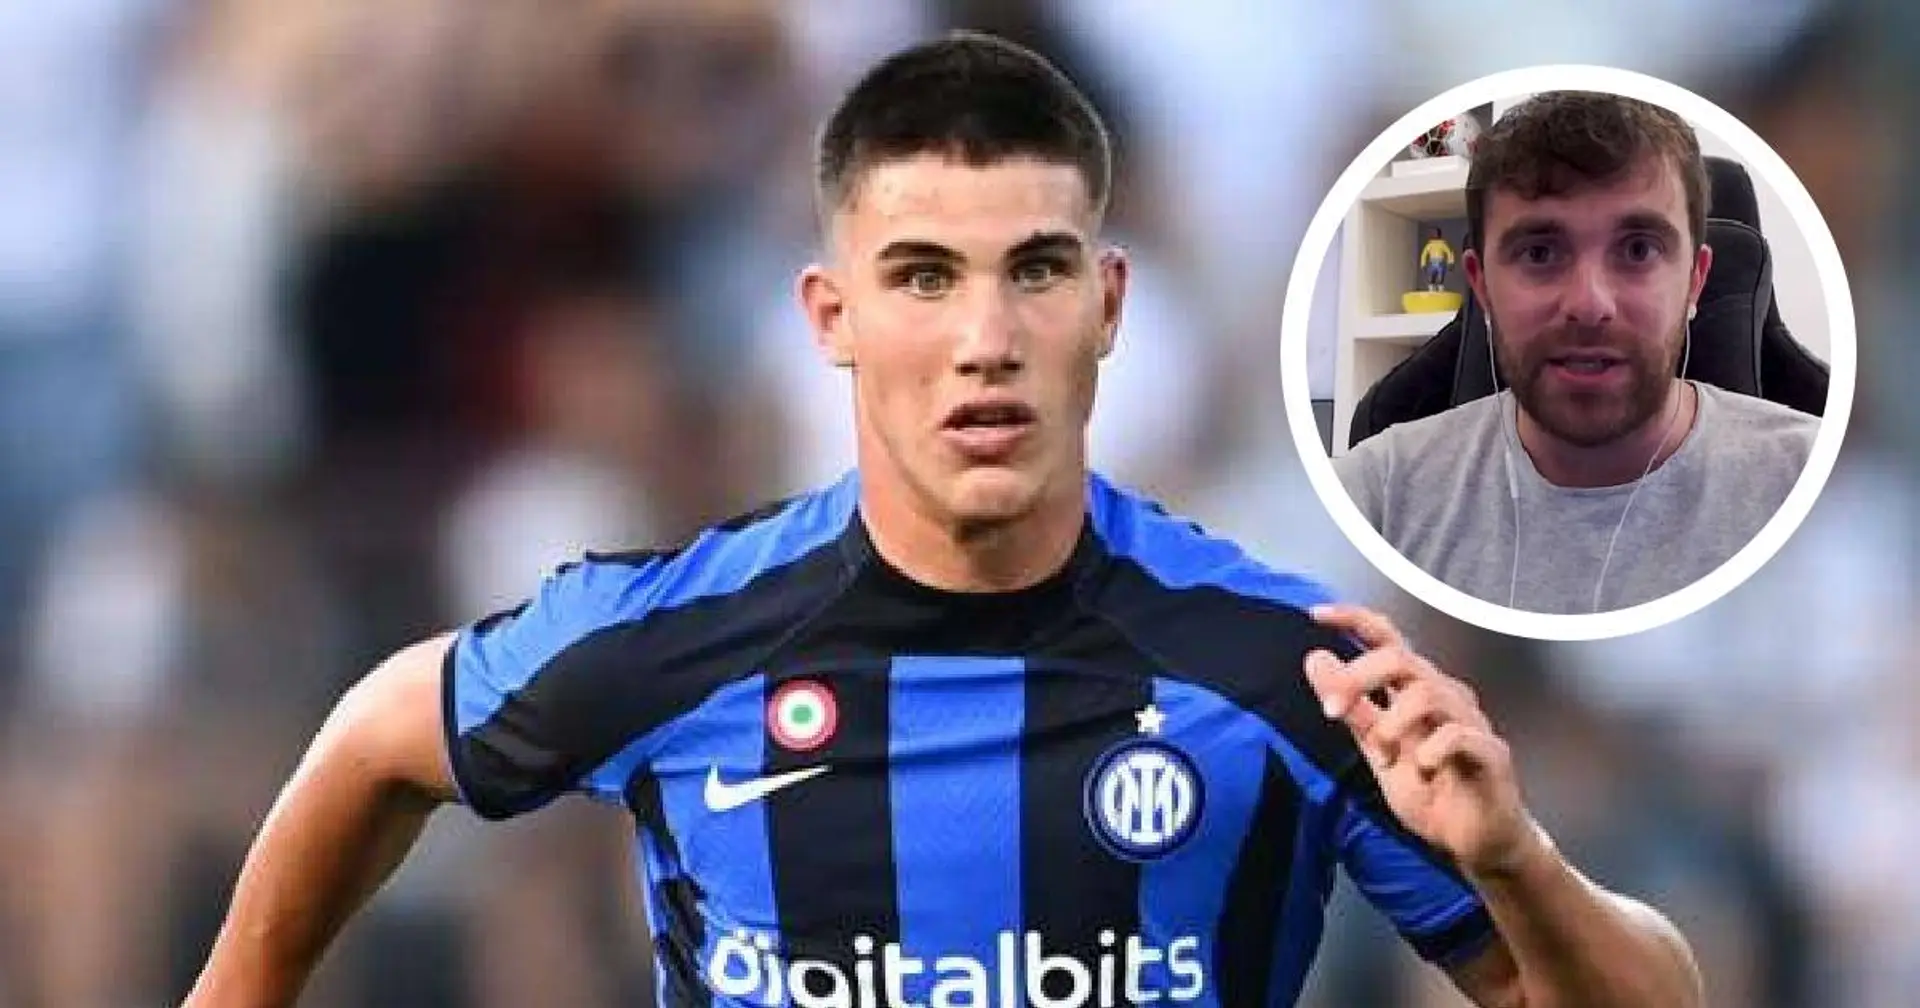 Chelsea will battle with OGC Nice for midfield talent Casadei's signing: Romano